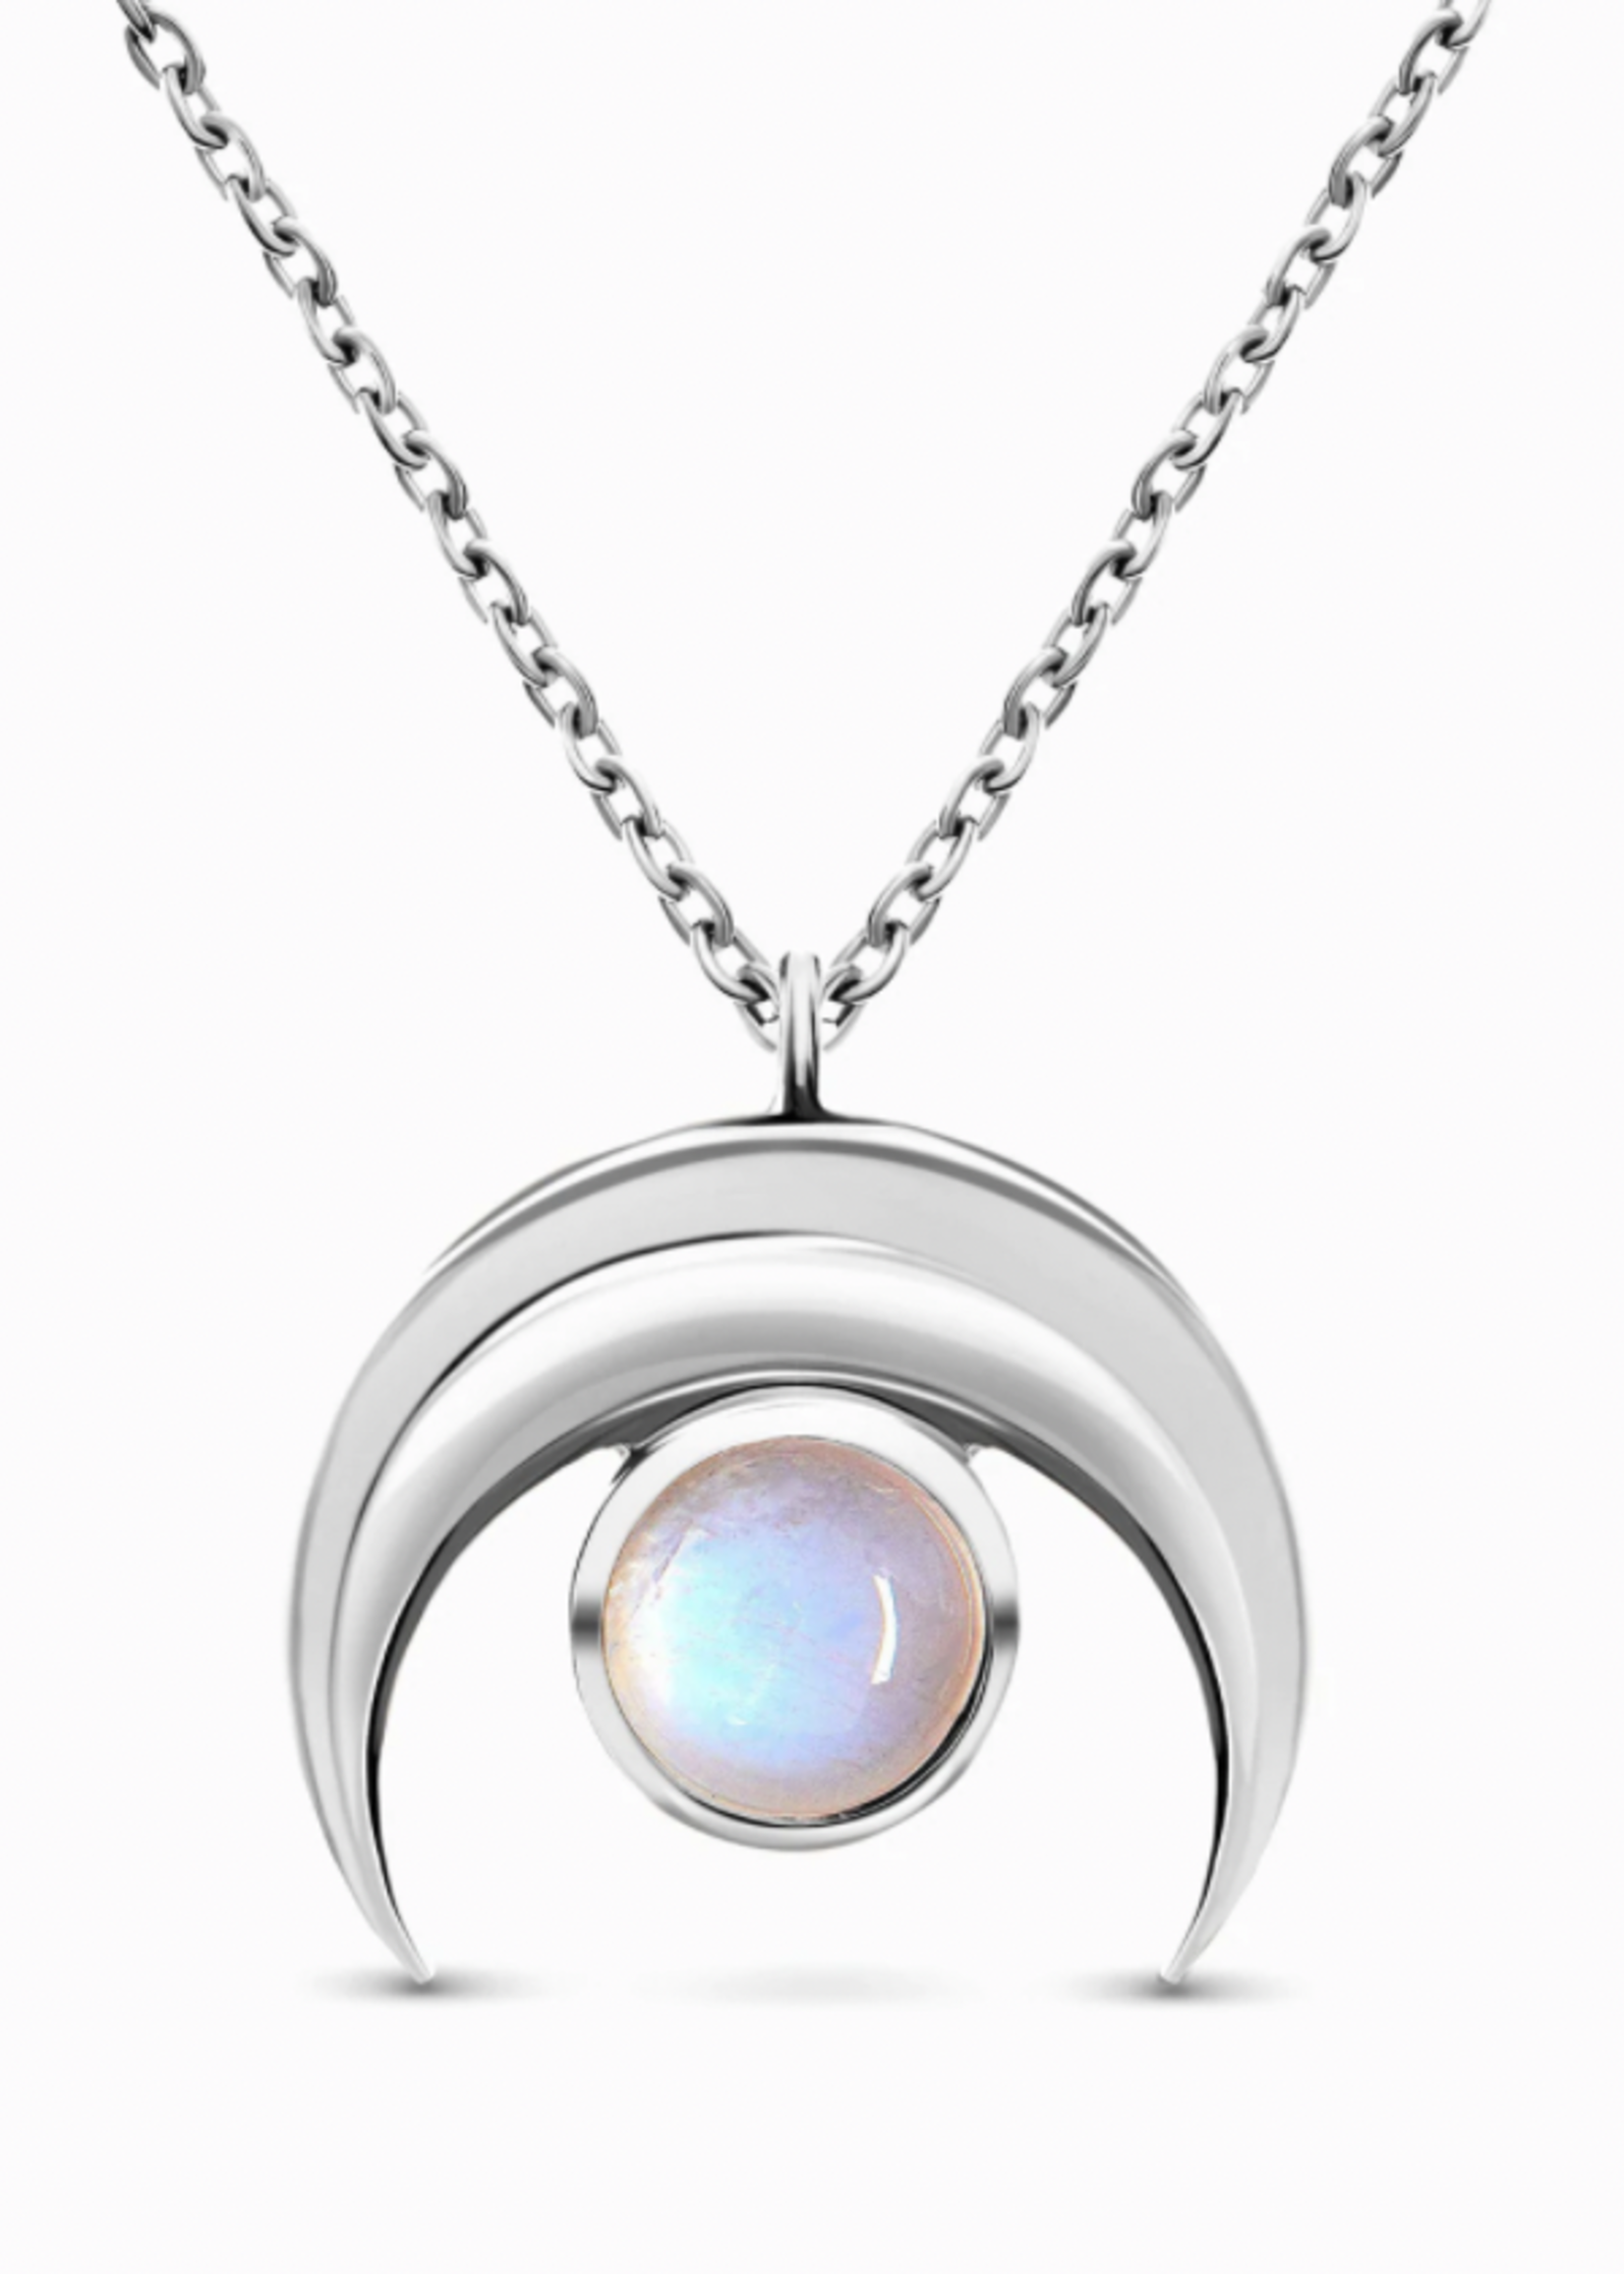 Crescent Moon Moonstone Necklace  Silver